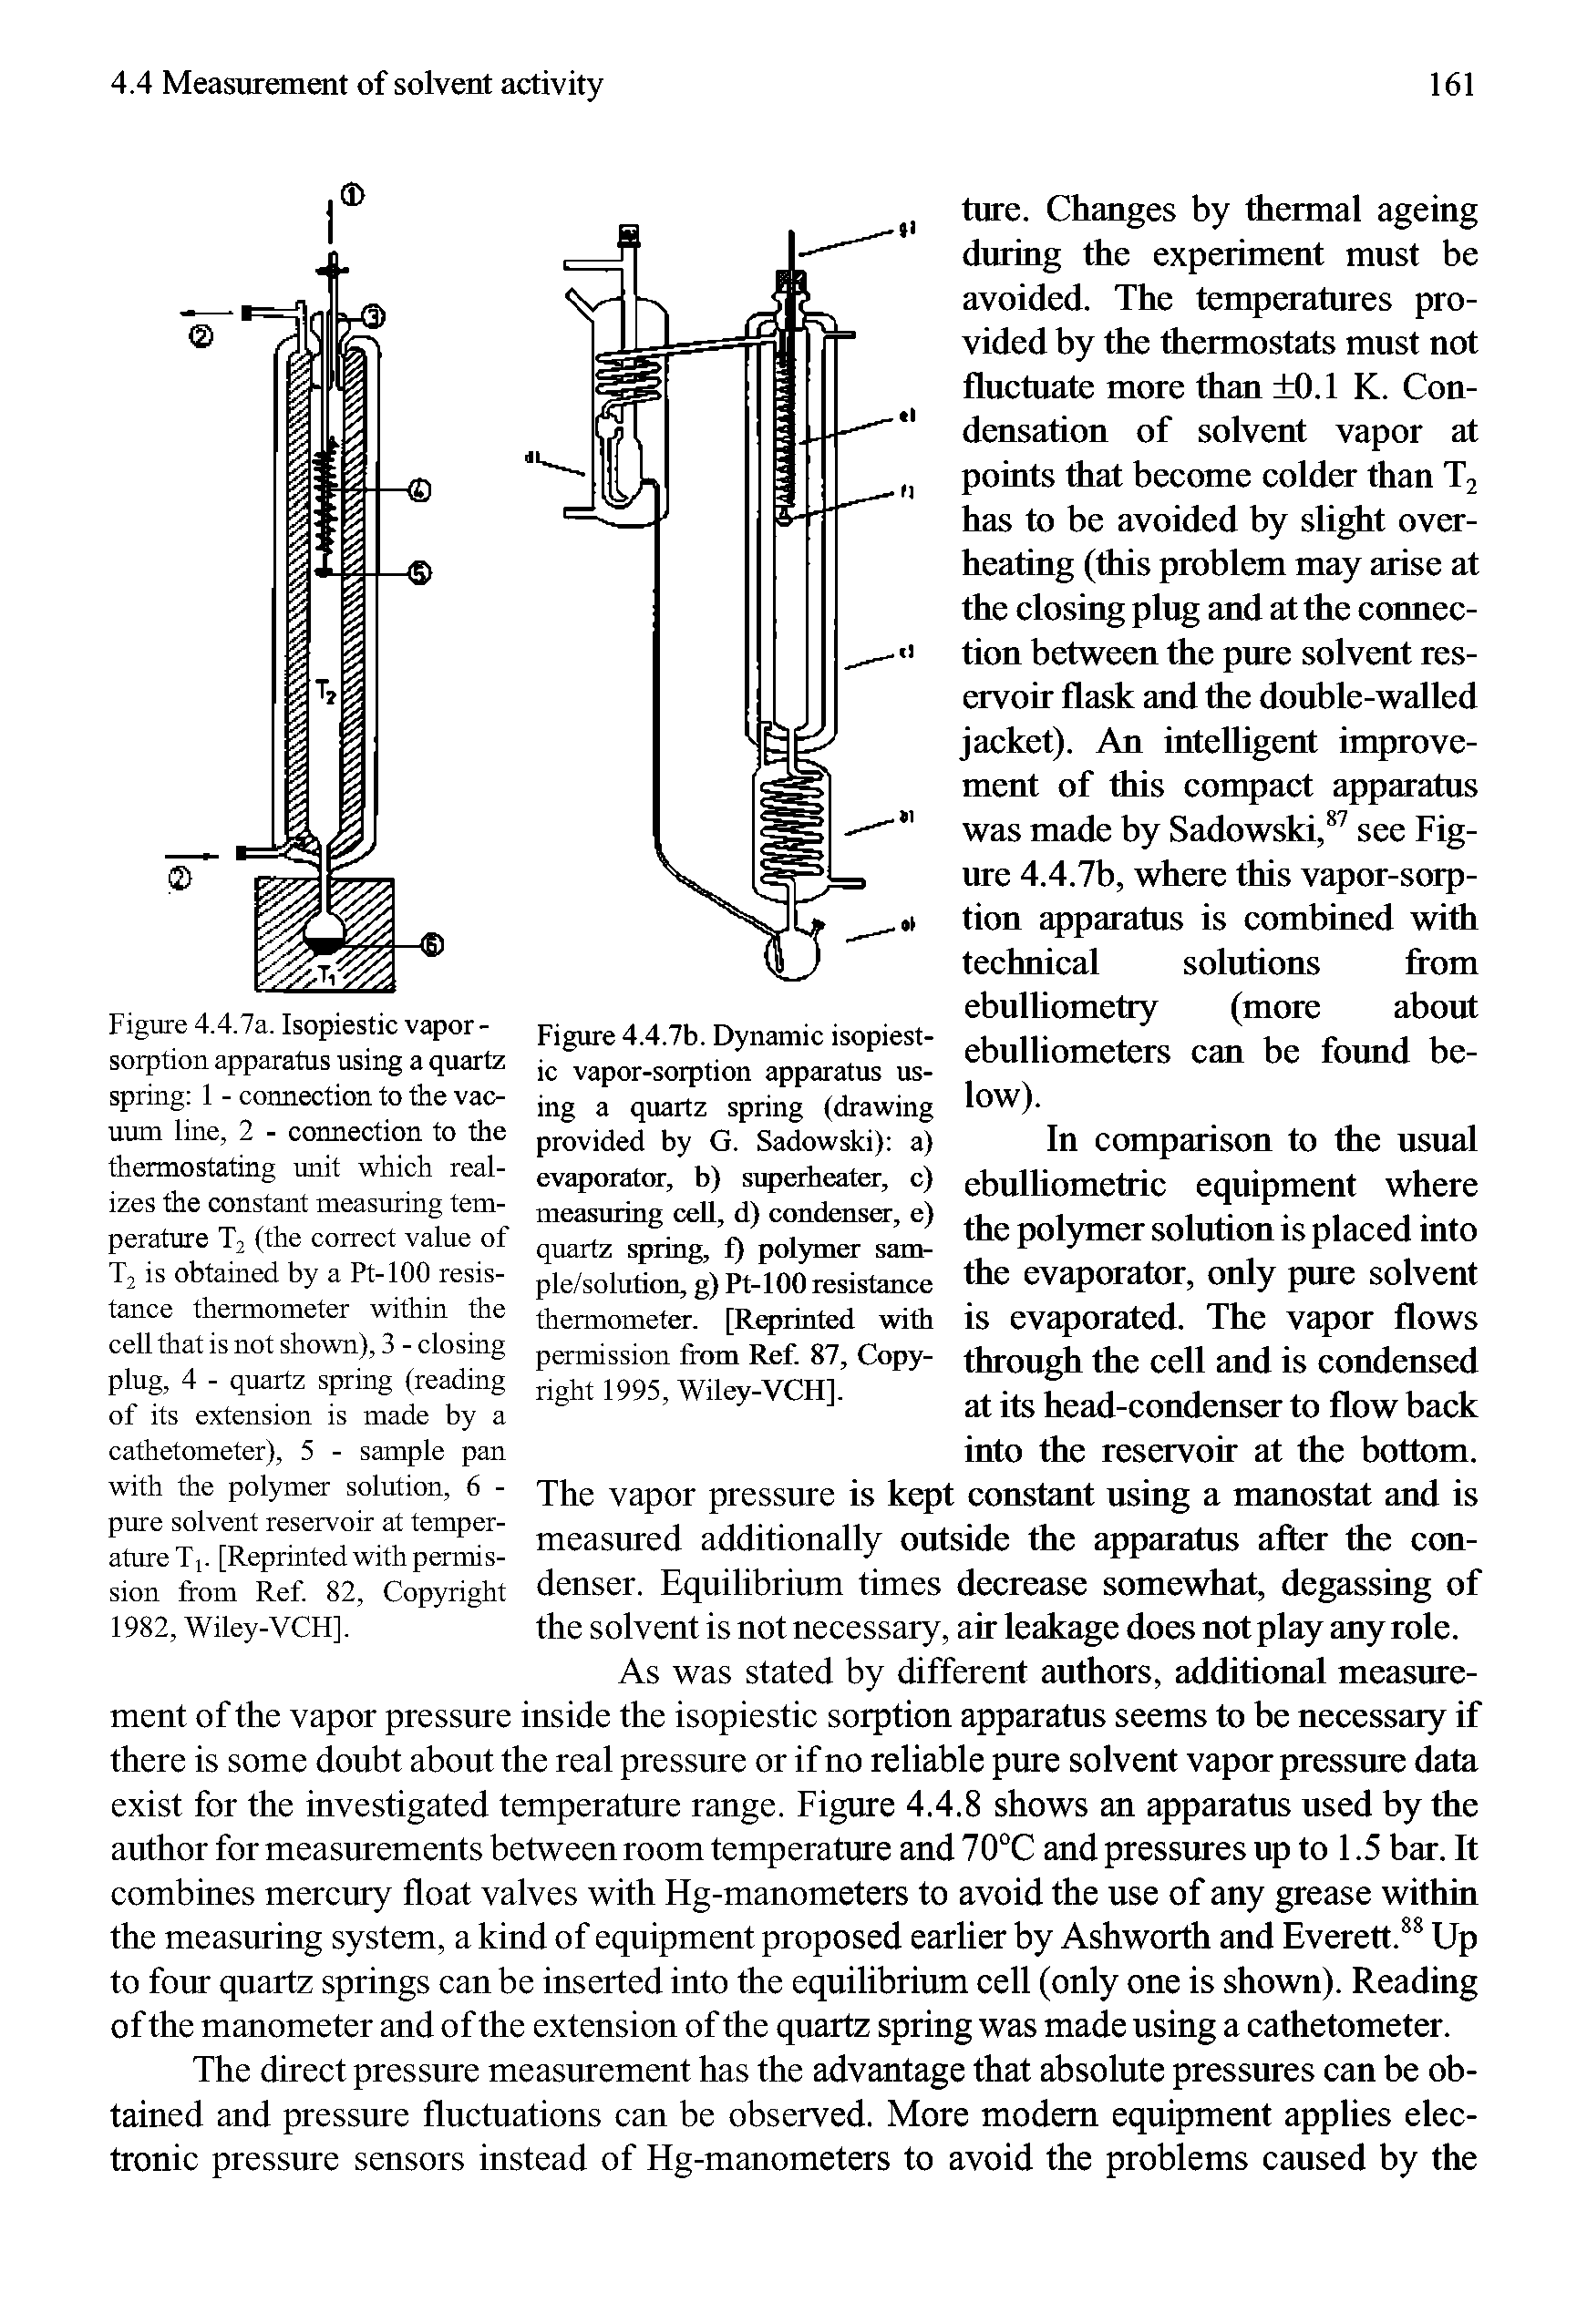 Figure 4.4.7b. Dynamic isopiesl-ic vapor-sorption apparatus using a quartz spring (drawing provided by G. Sadowski) a) evaporator, b) superheater, c) measuring cell, d) condenser, e) quartz spring, f) polymer sam-ple/solution, g) Pt-100 resistance thermometer. [Reprinted with permission from Ref. 87, Copyright 1995, Wiley-VCH].